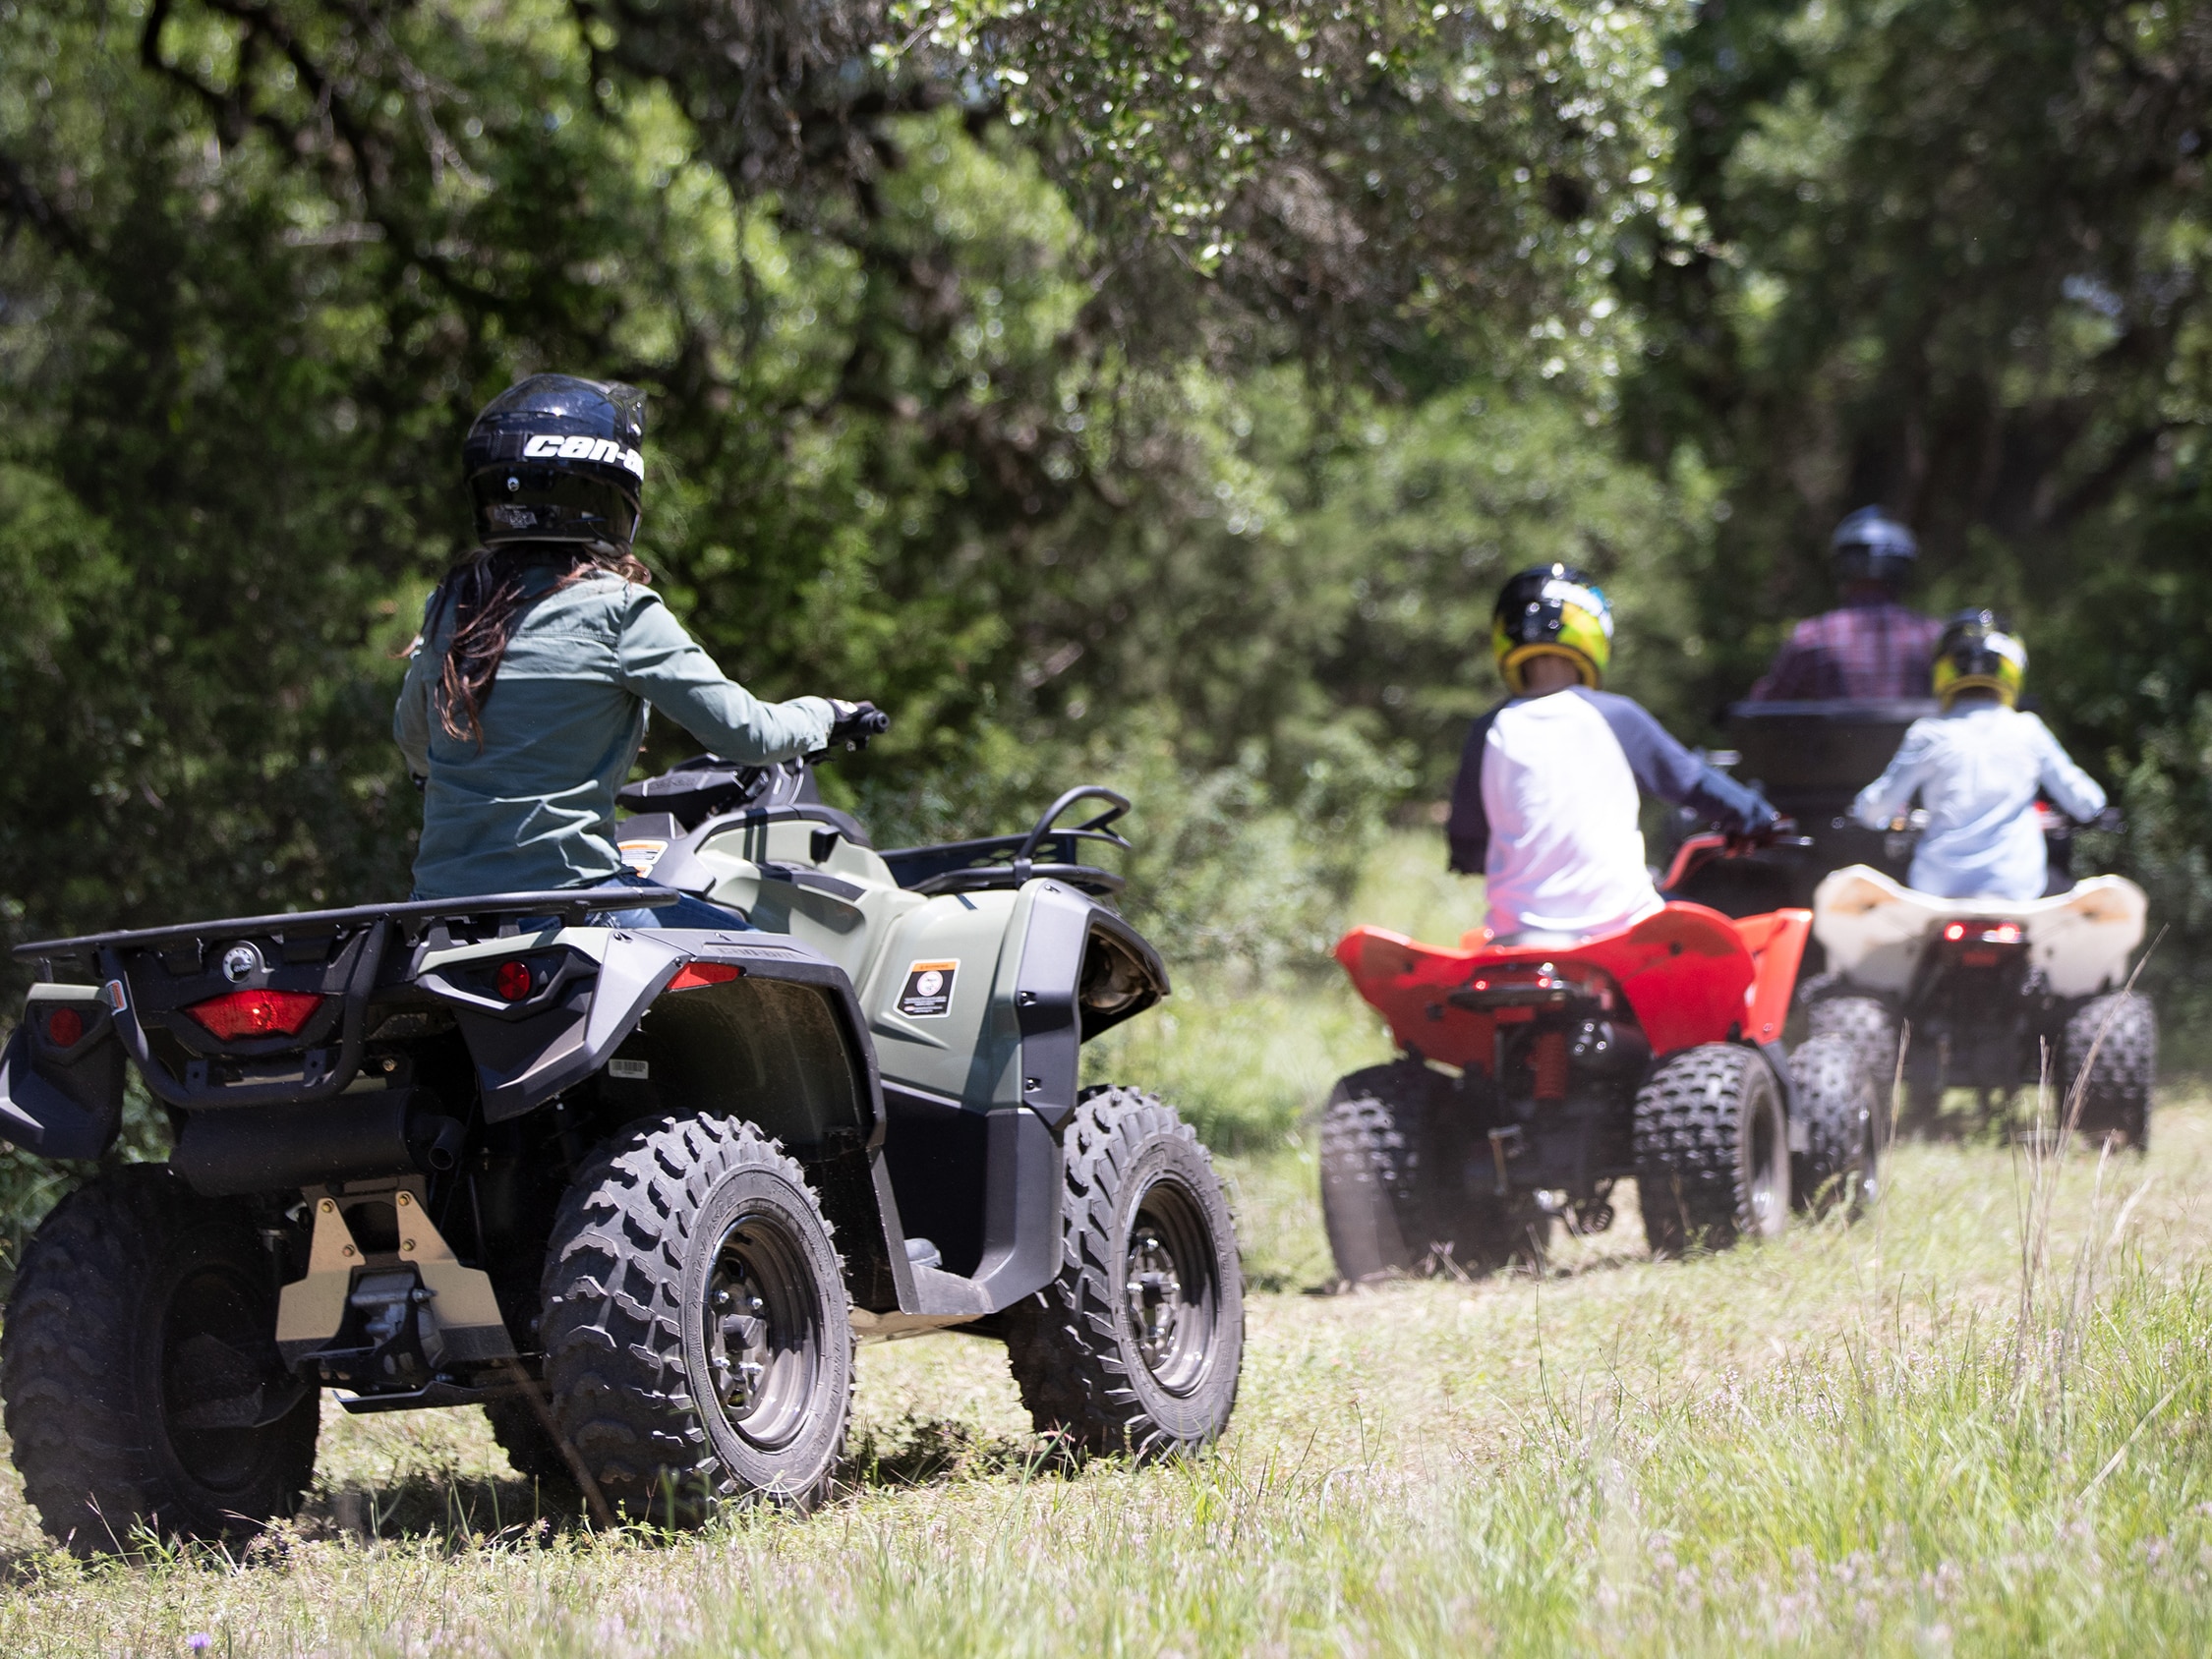 Family going on an excursion with their Can-Am Off-Road rides